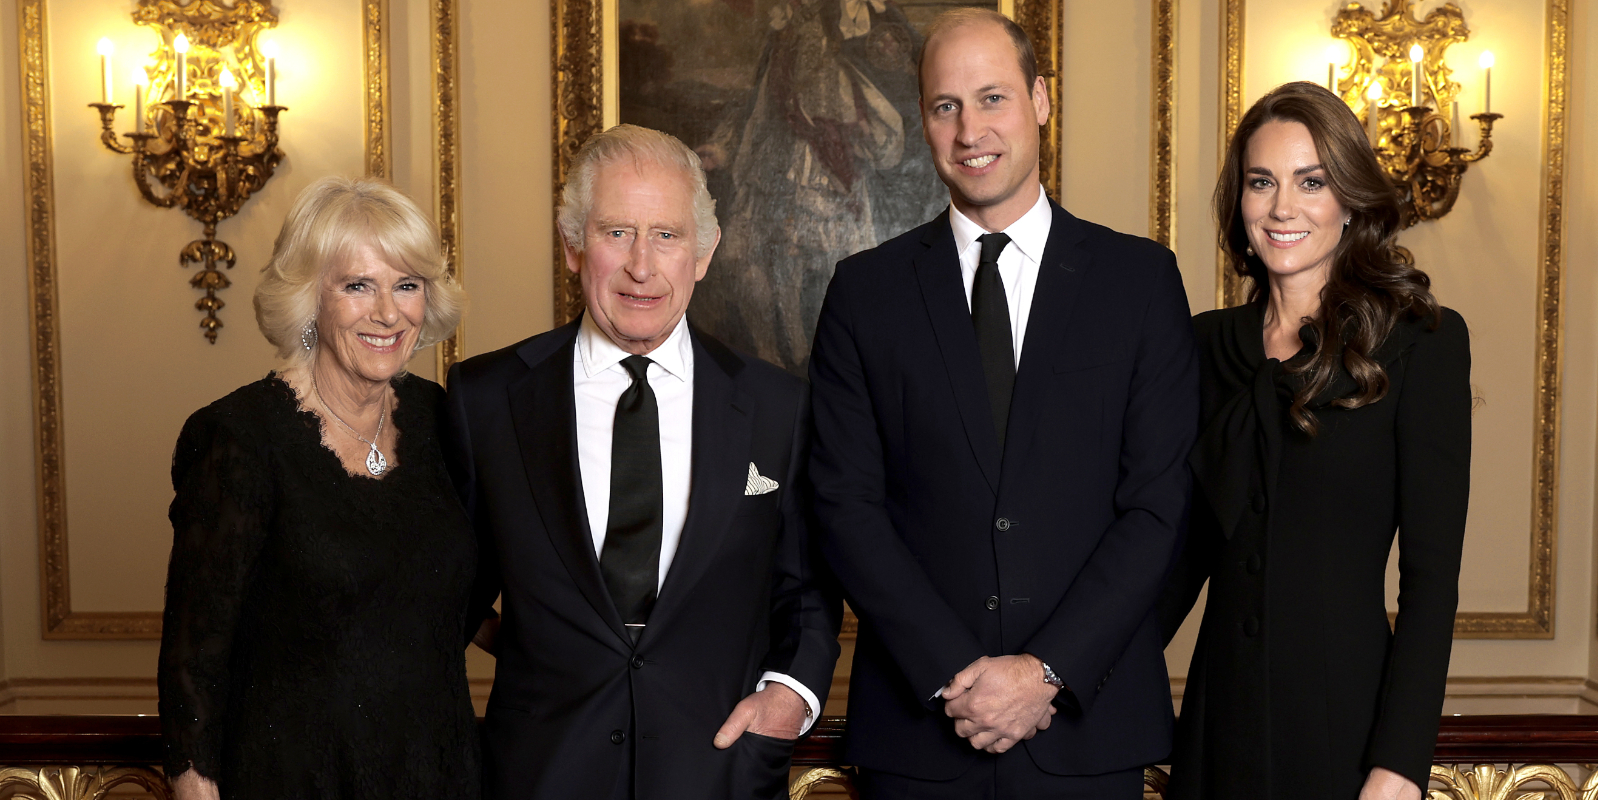 Camilla Parker Bowles, King Charles III, Prince William and Kate Middleton in a photograph taken shortly after the death of Queen Elizabeth II.